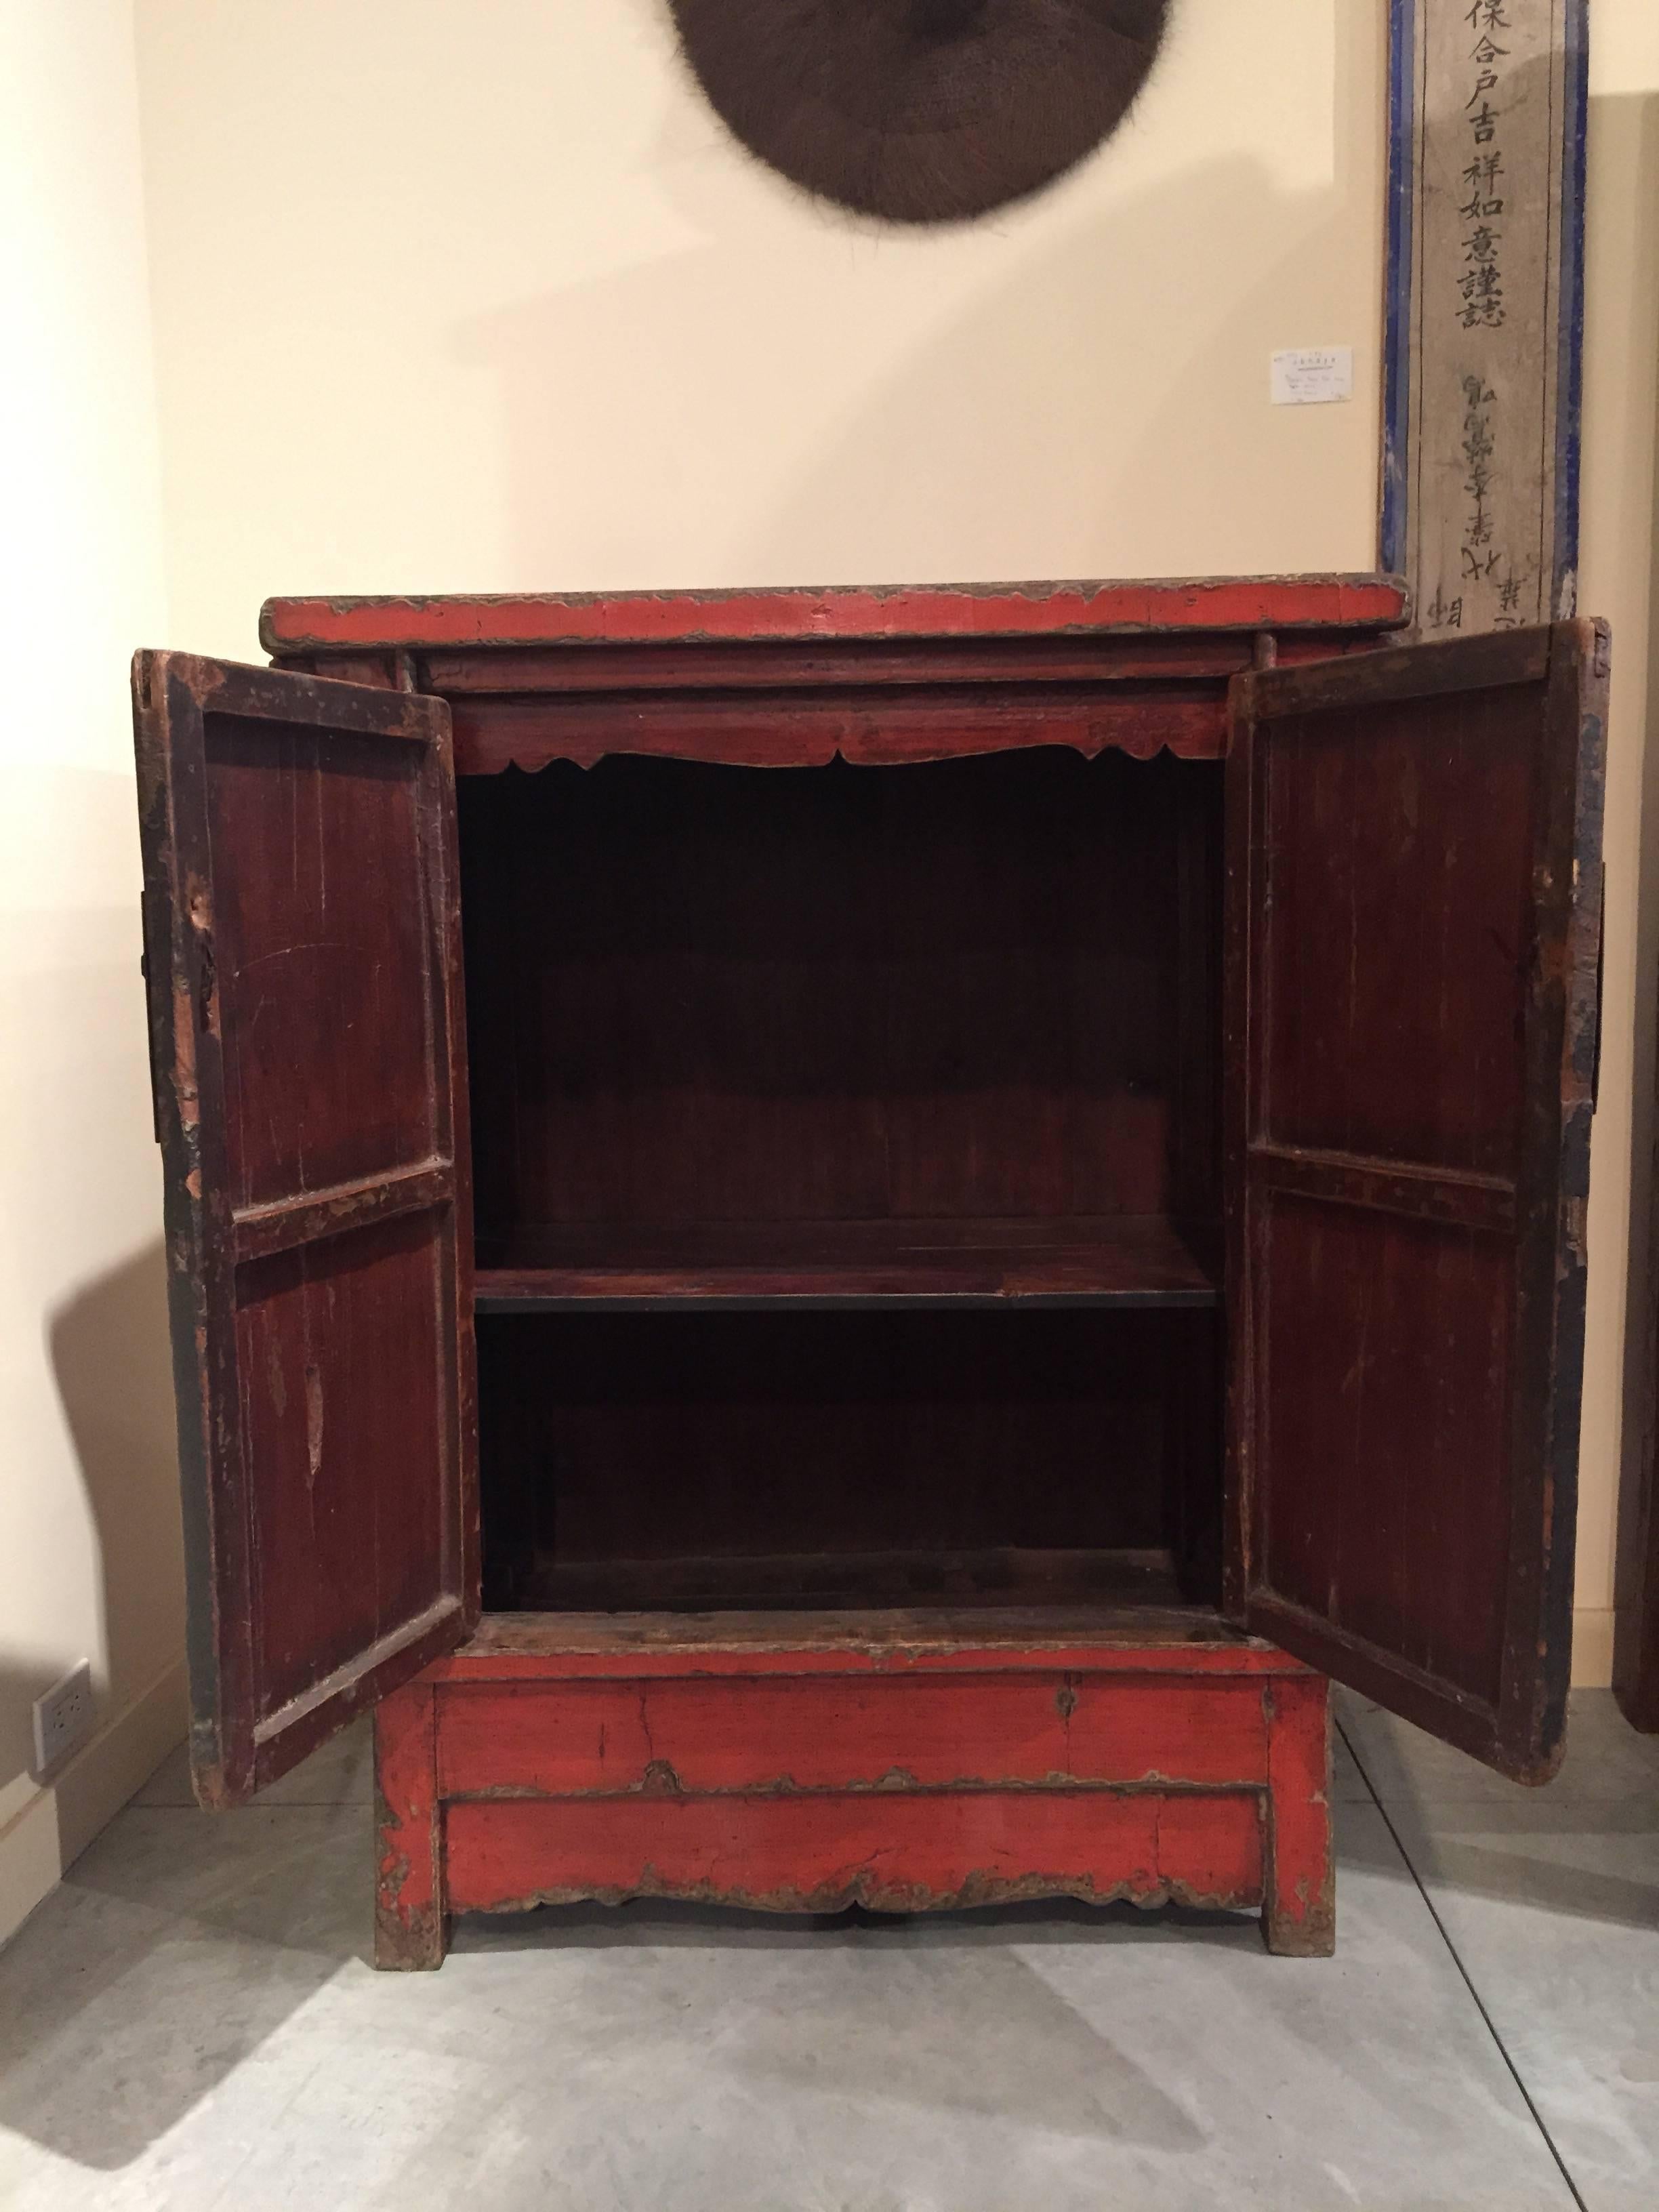 Chinese Antique Red Lacquer Cabinet